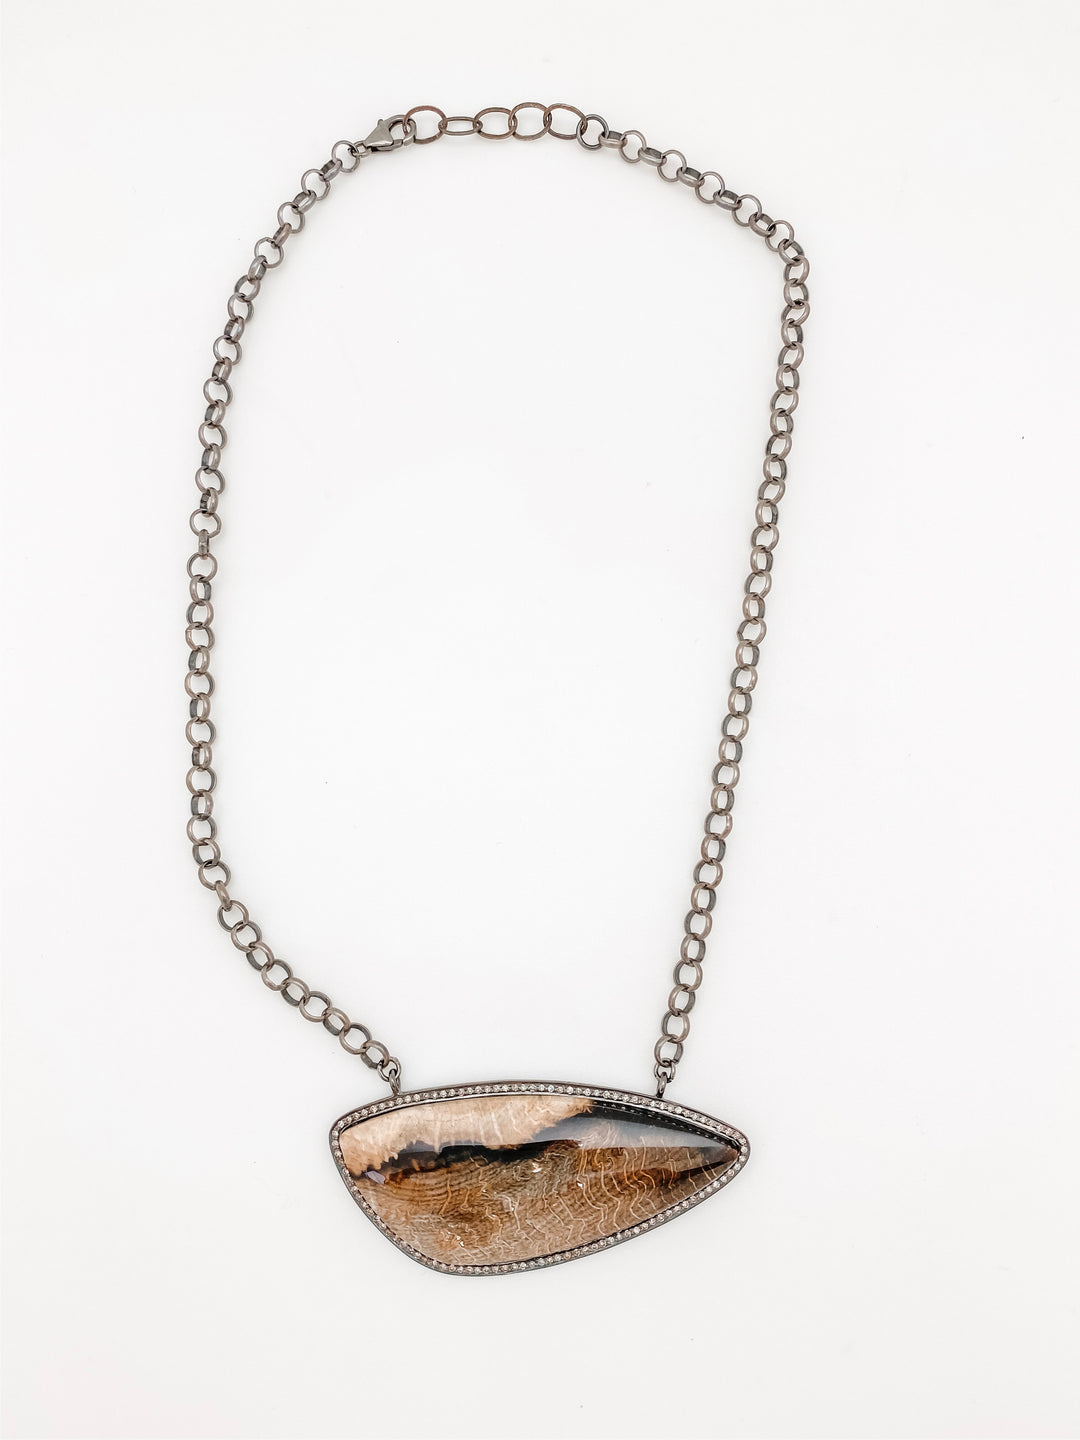 Petrified Wood Stone Pendant with Pave Diamonds on sterling silver chain